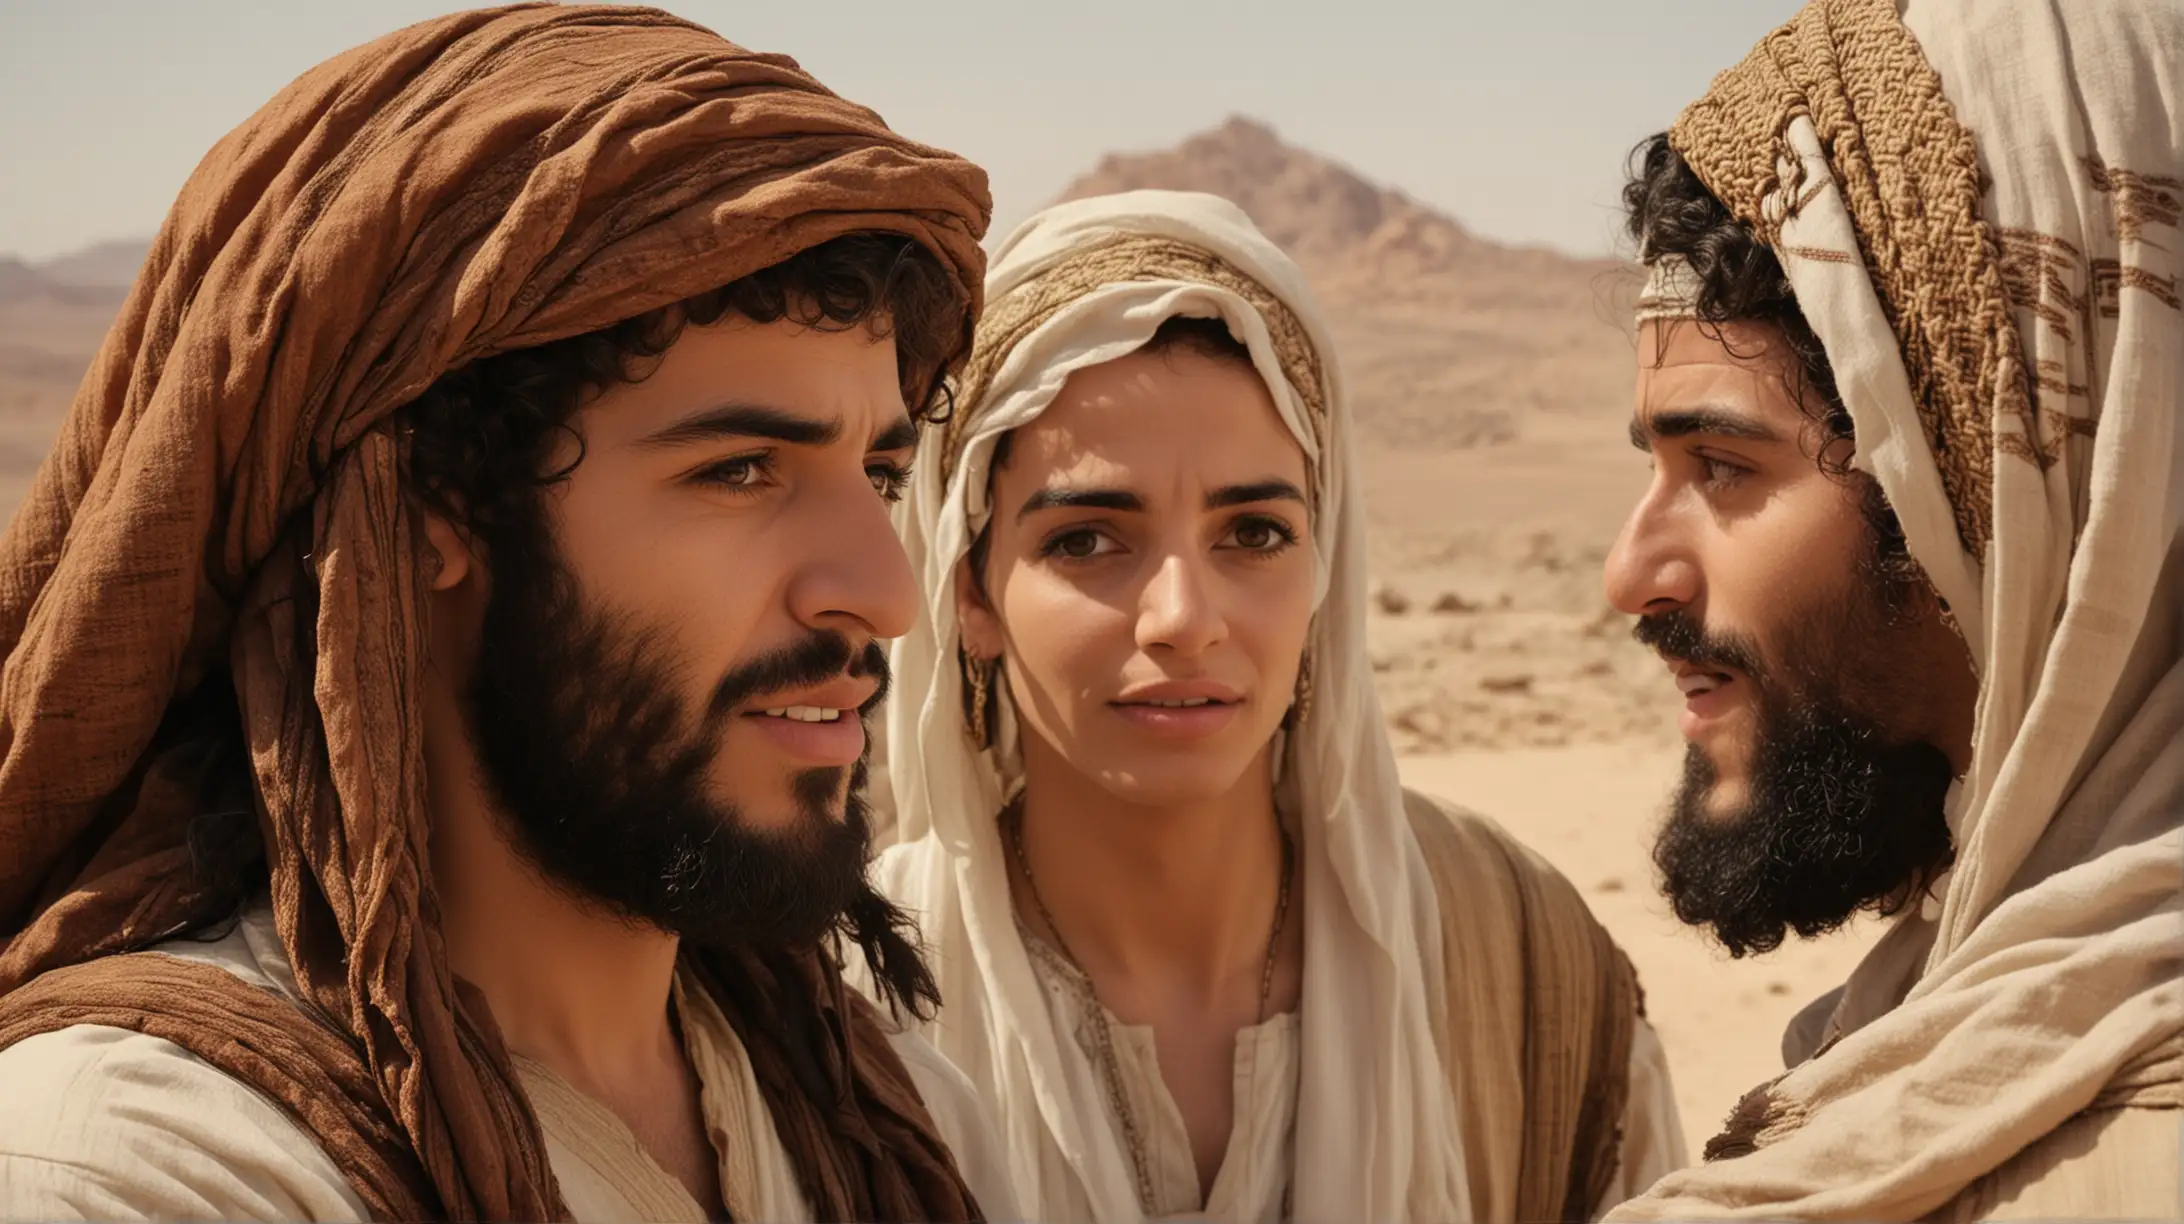 Middle Eastern Men Conversing with Attractive Woman in Biblical Desert Scene